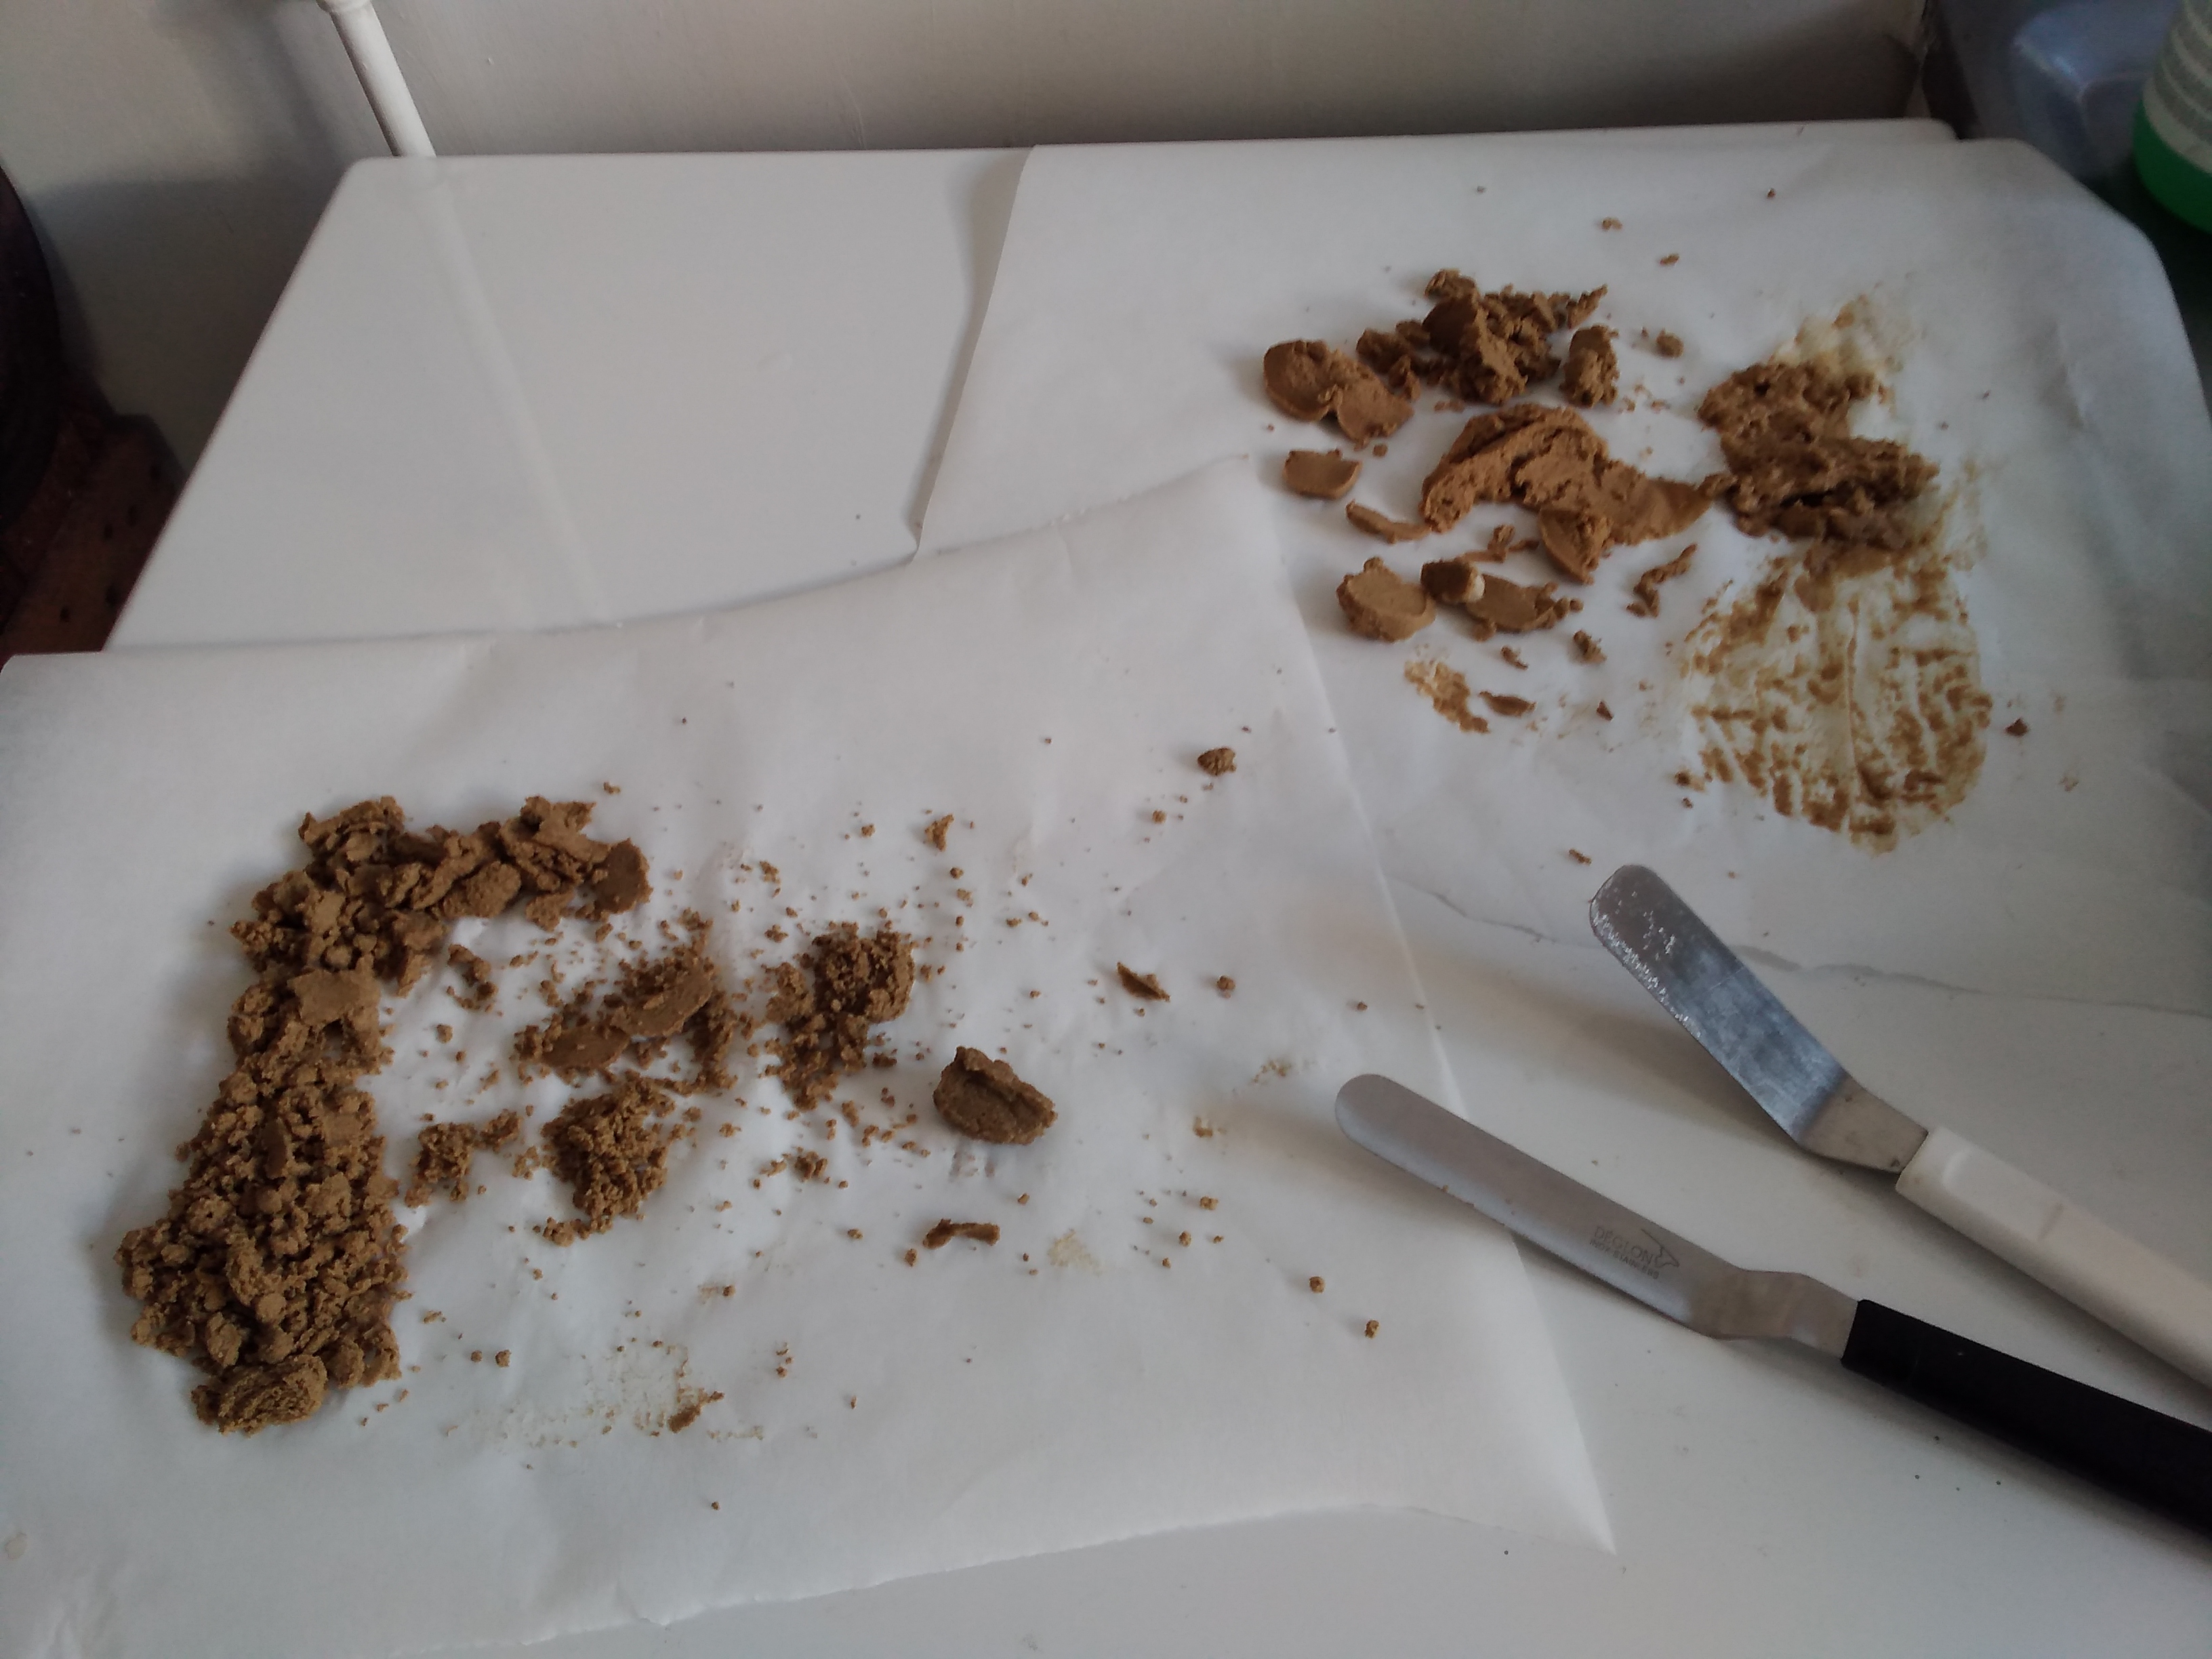 How to Make Hash: Dry-sift, Charas, and Bubble Hash - Sensi Seeds